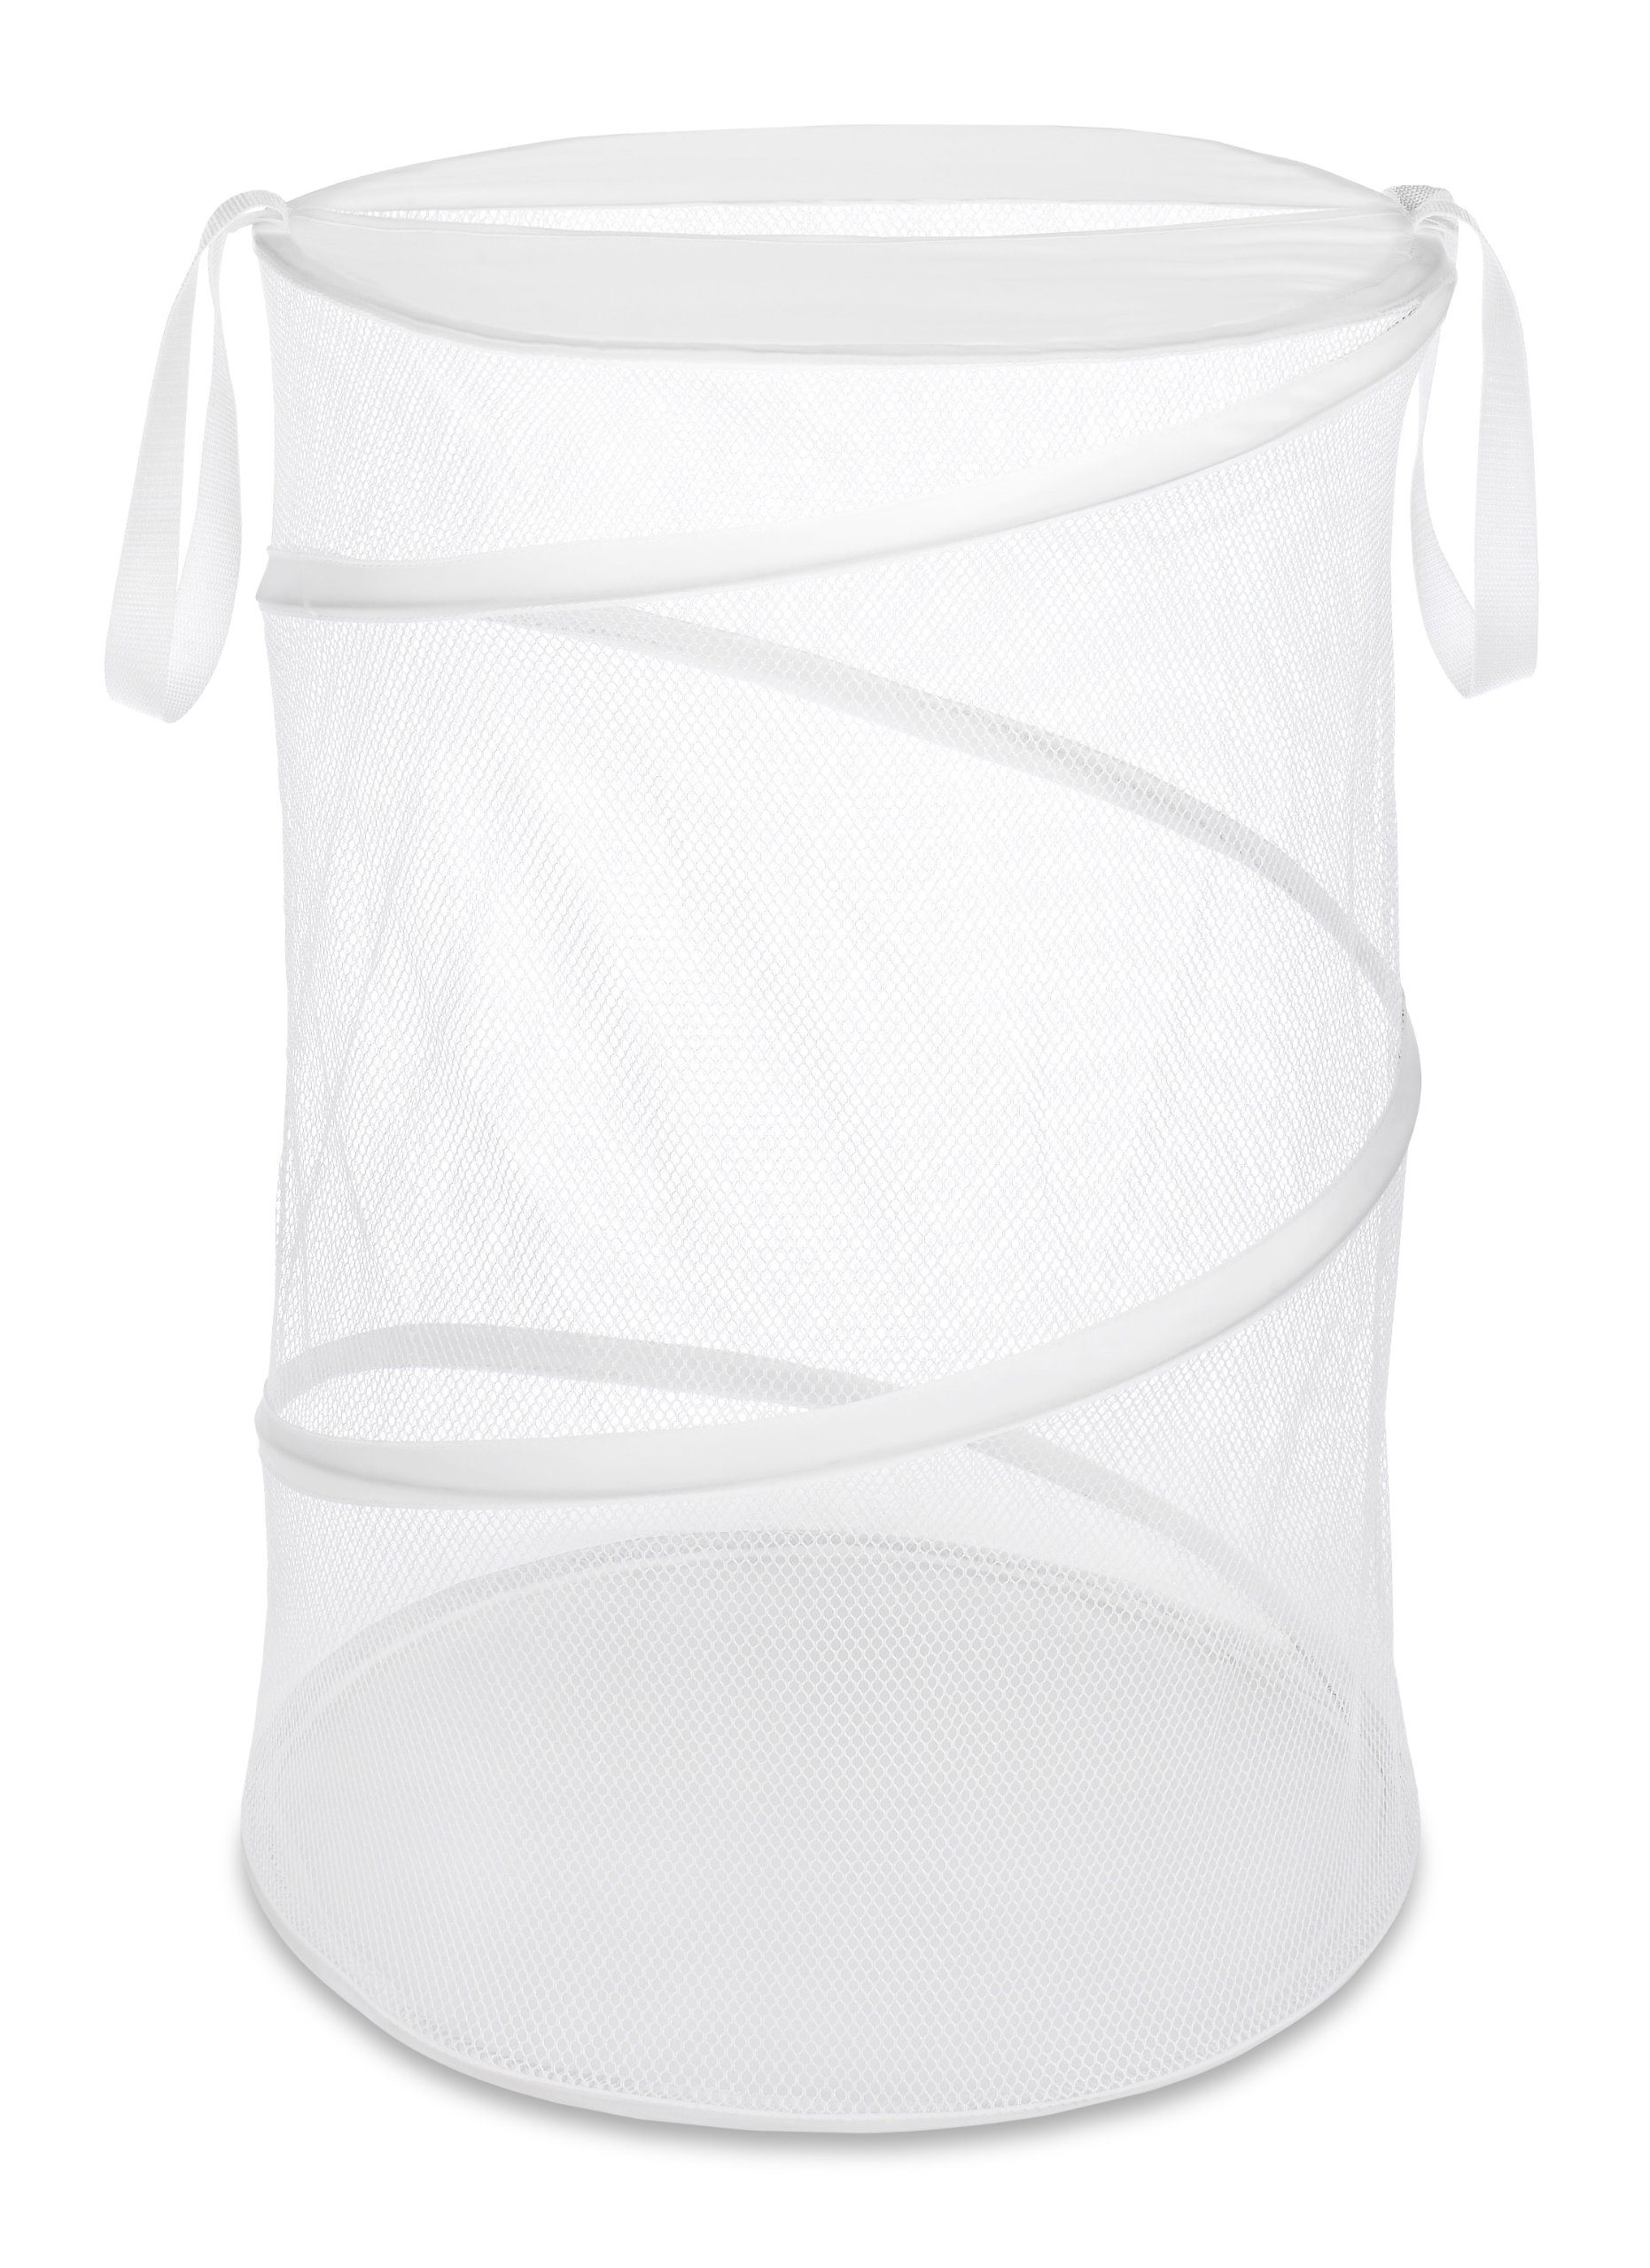 Collapsible Laundry Hamper White 18"